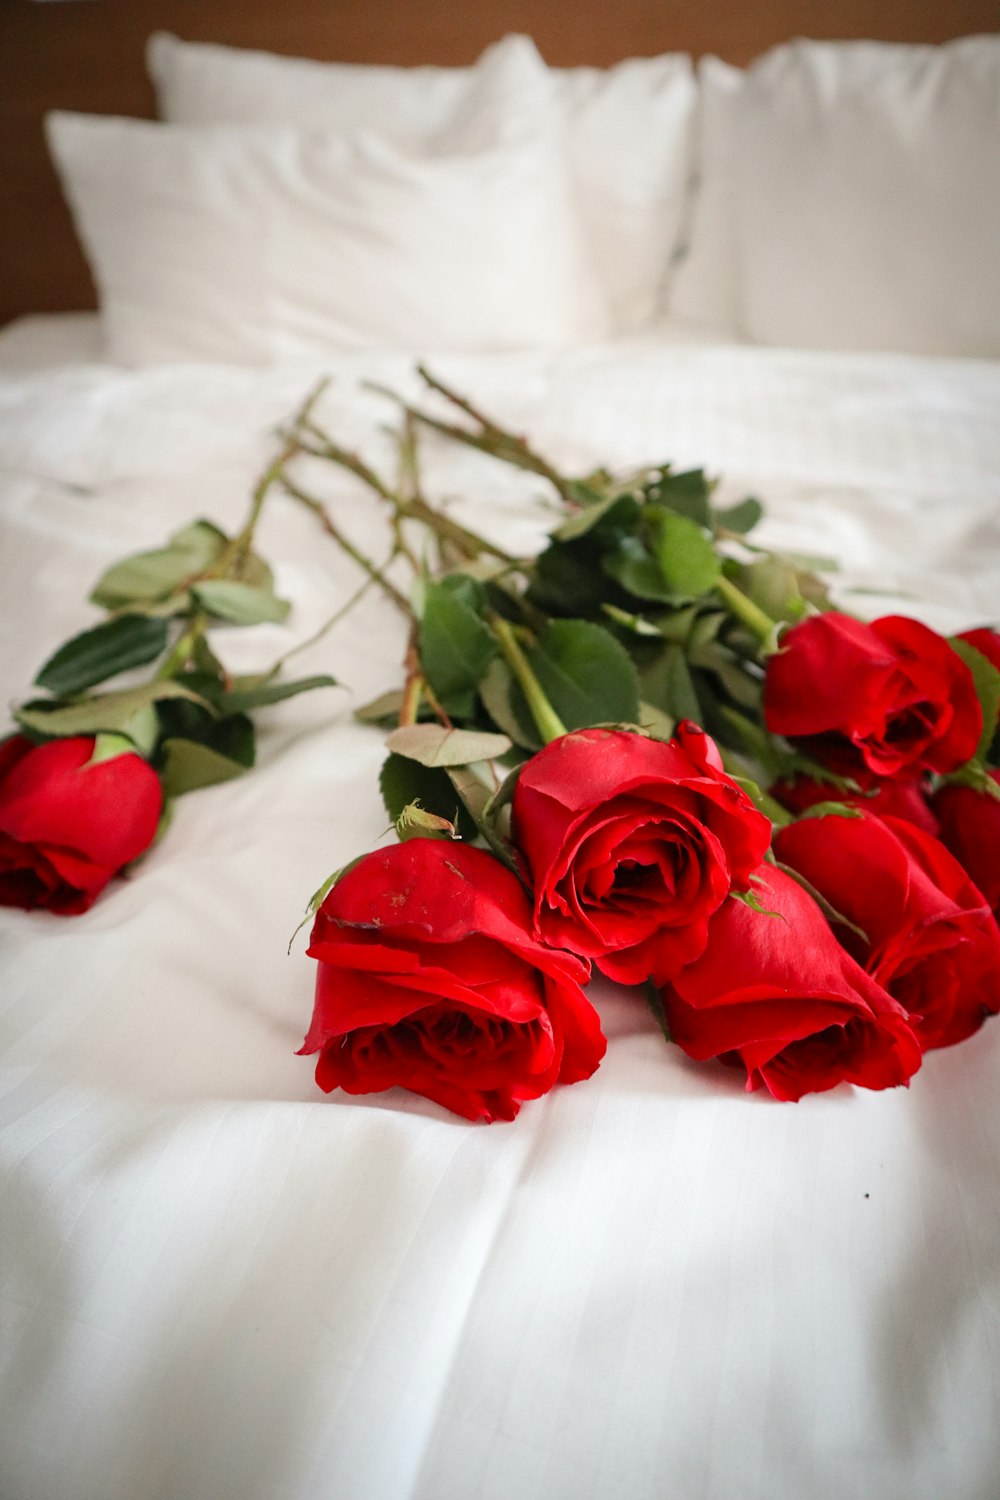 A bunch of red roses laying on a bed photo – Free Canada Image on Unsplash